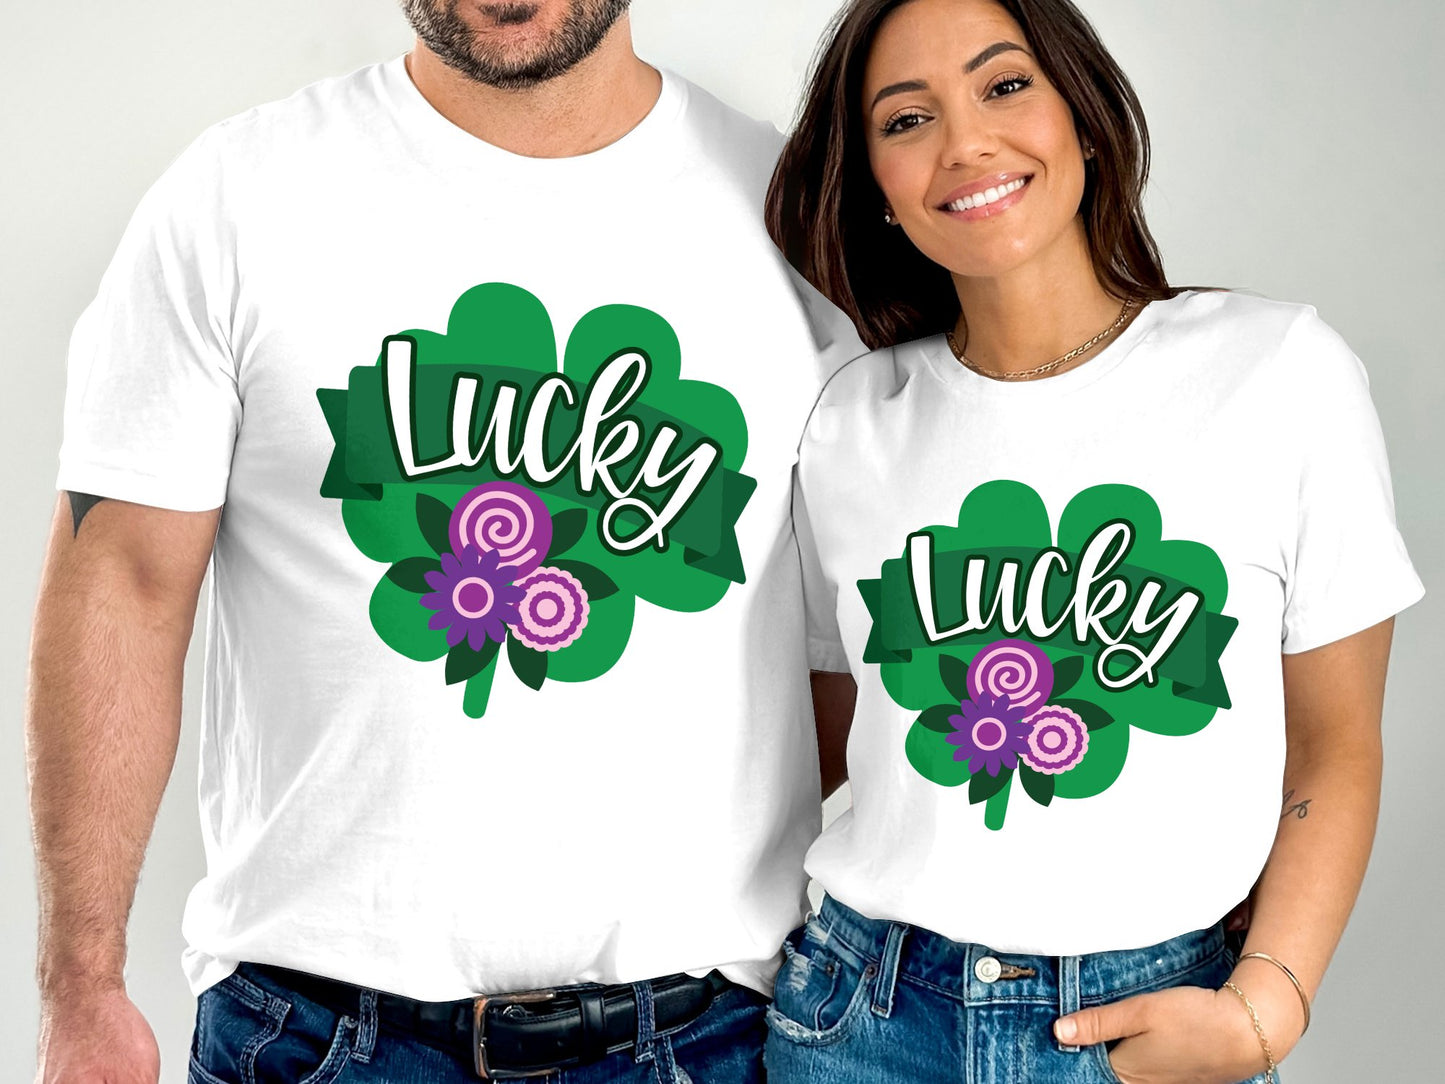 Lucky (St. Patrick's Day T-shirt)